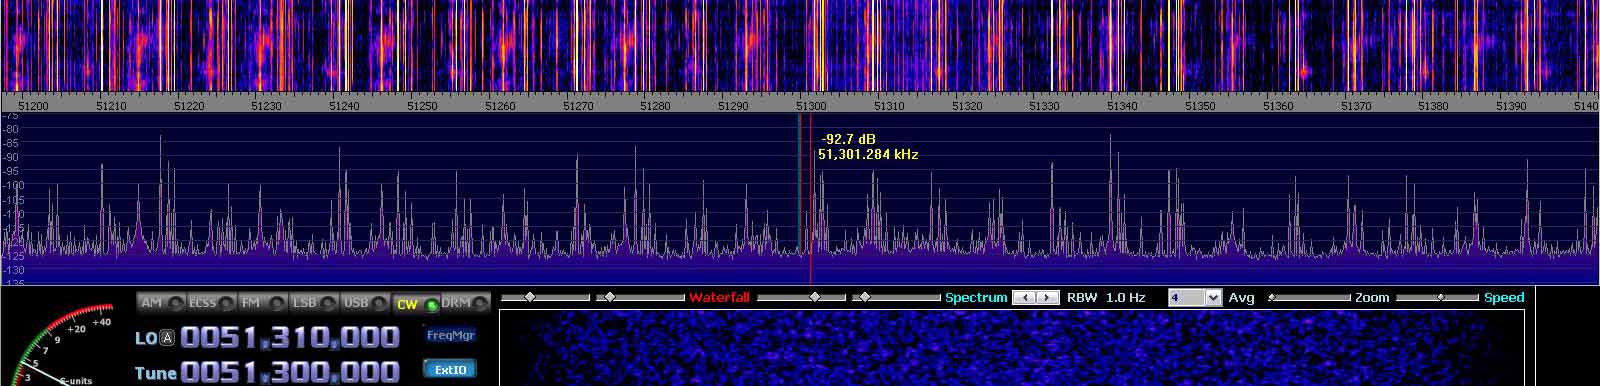 2014-07-04 51.300 MHz +- 100 kHz - Strong Es - 4-el dipole array with ends to St P - (c) OH7HJ.JPG